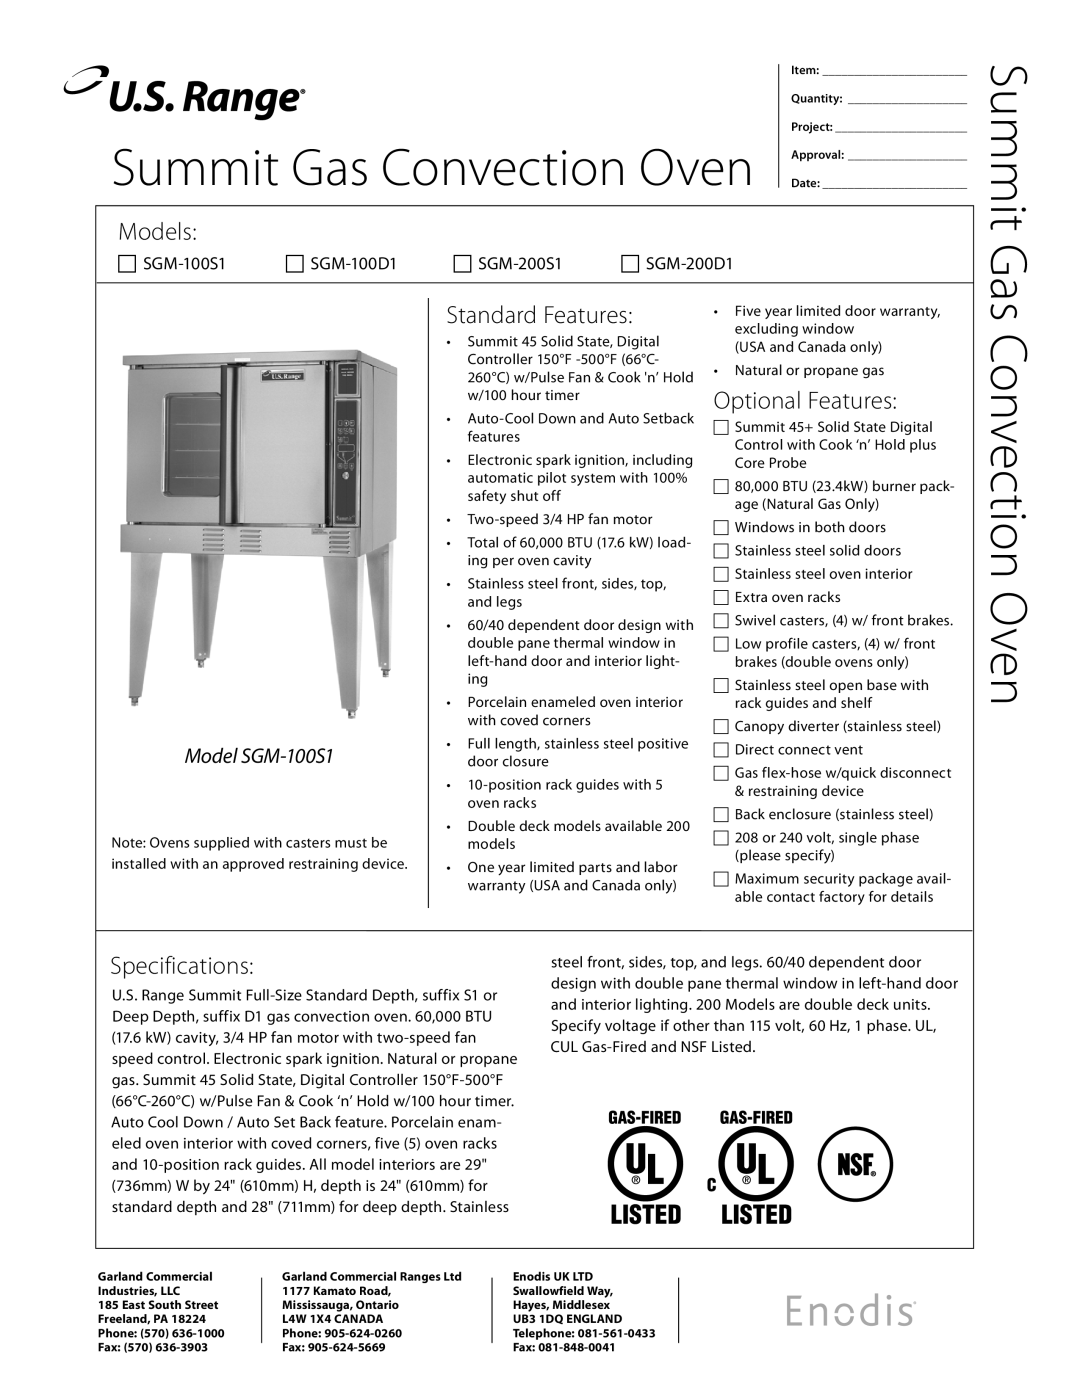 Garland SGM-100S1 specifications Convection Oven, Summit Gas, Models, Standard Features, Optional Features, Specifications 